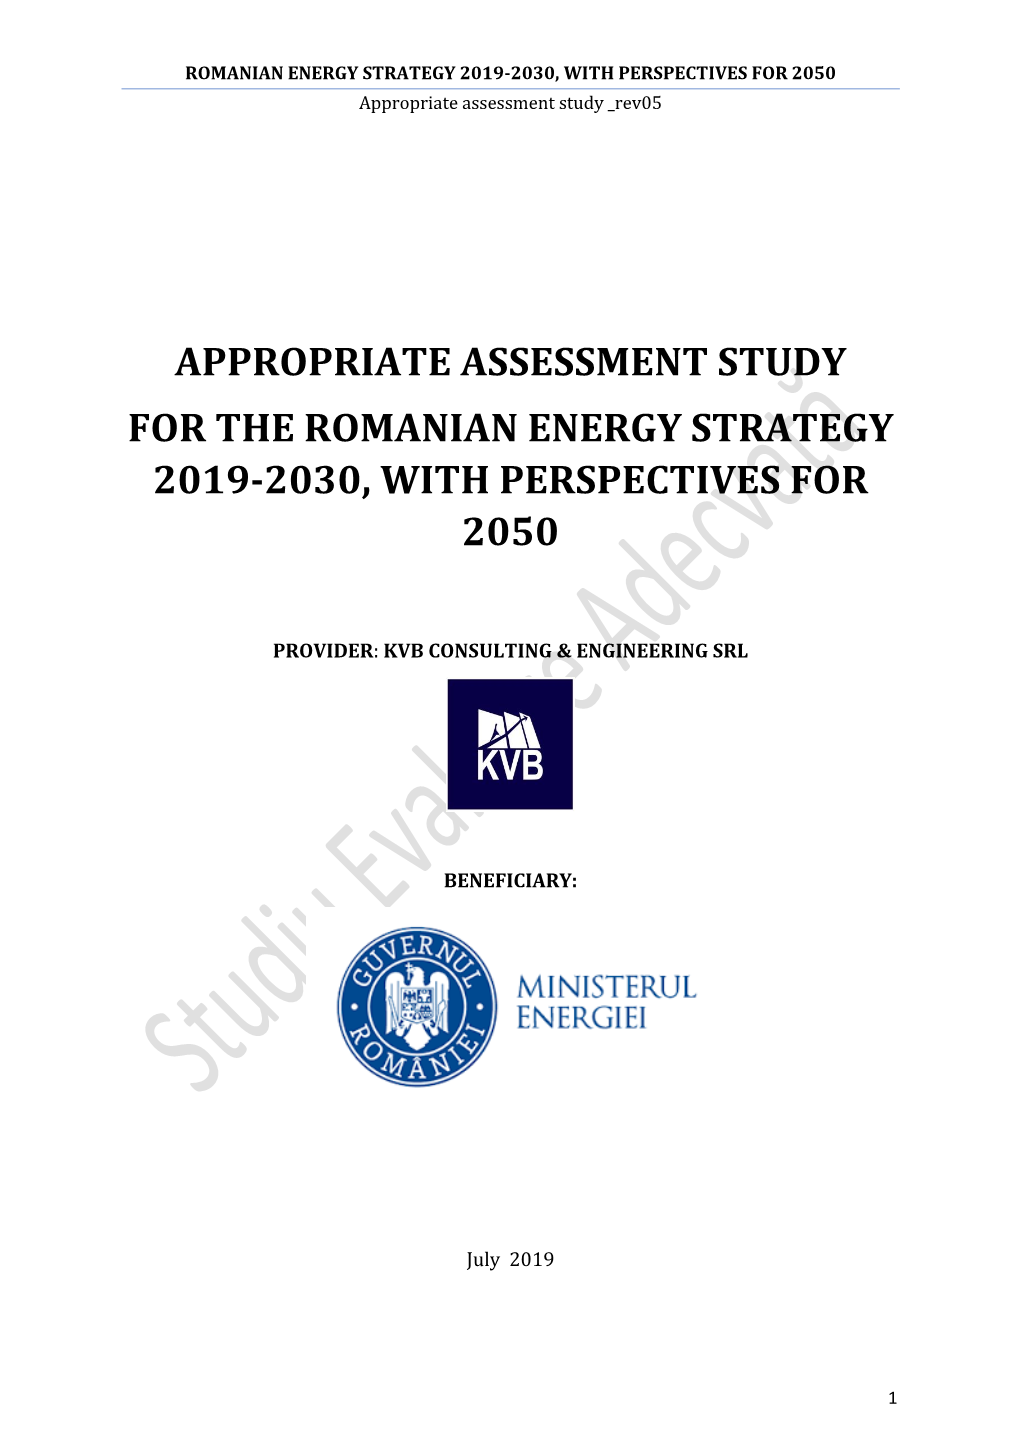 Appropriate Assessment Study for the Romanian Energy Strategy 2019-2030, with Perspectives for 2050